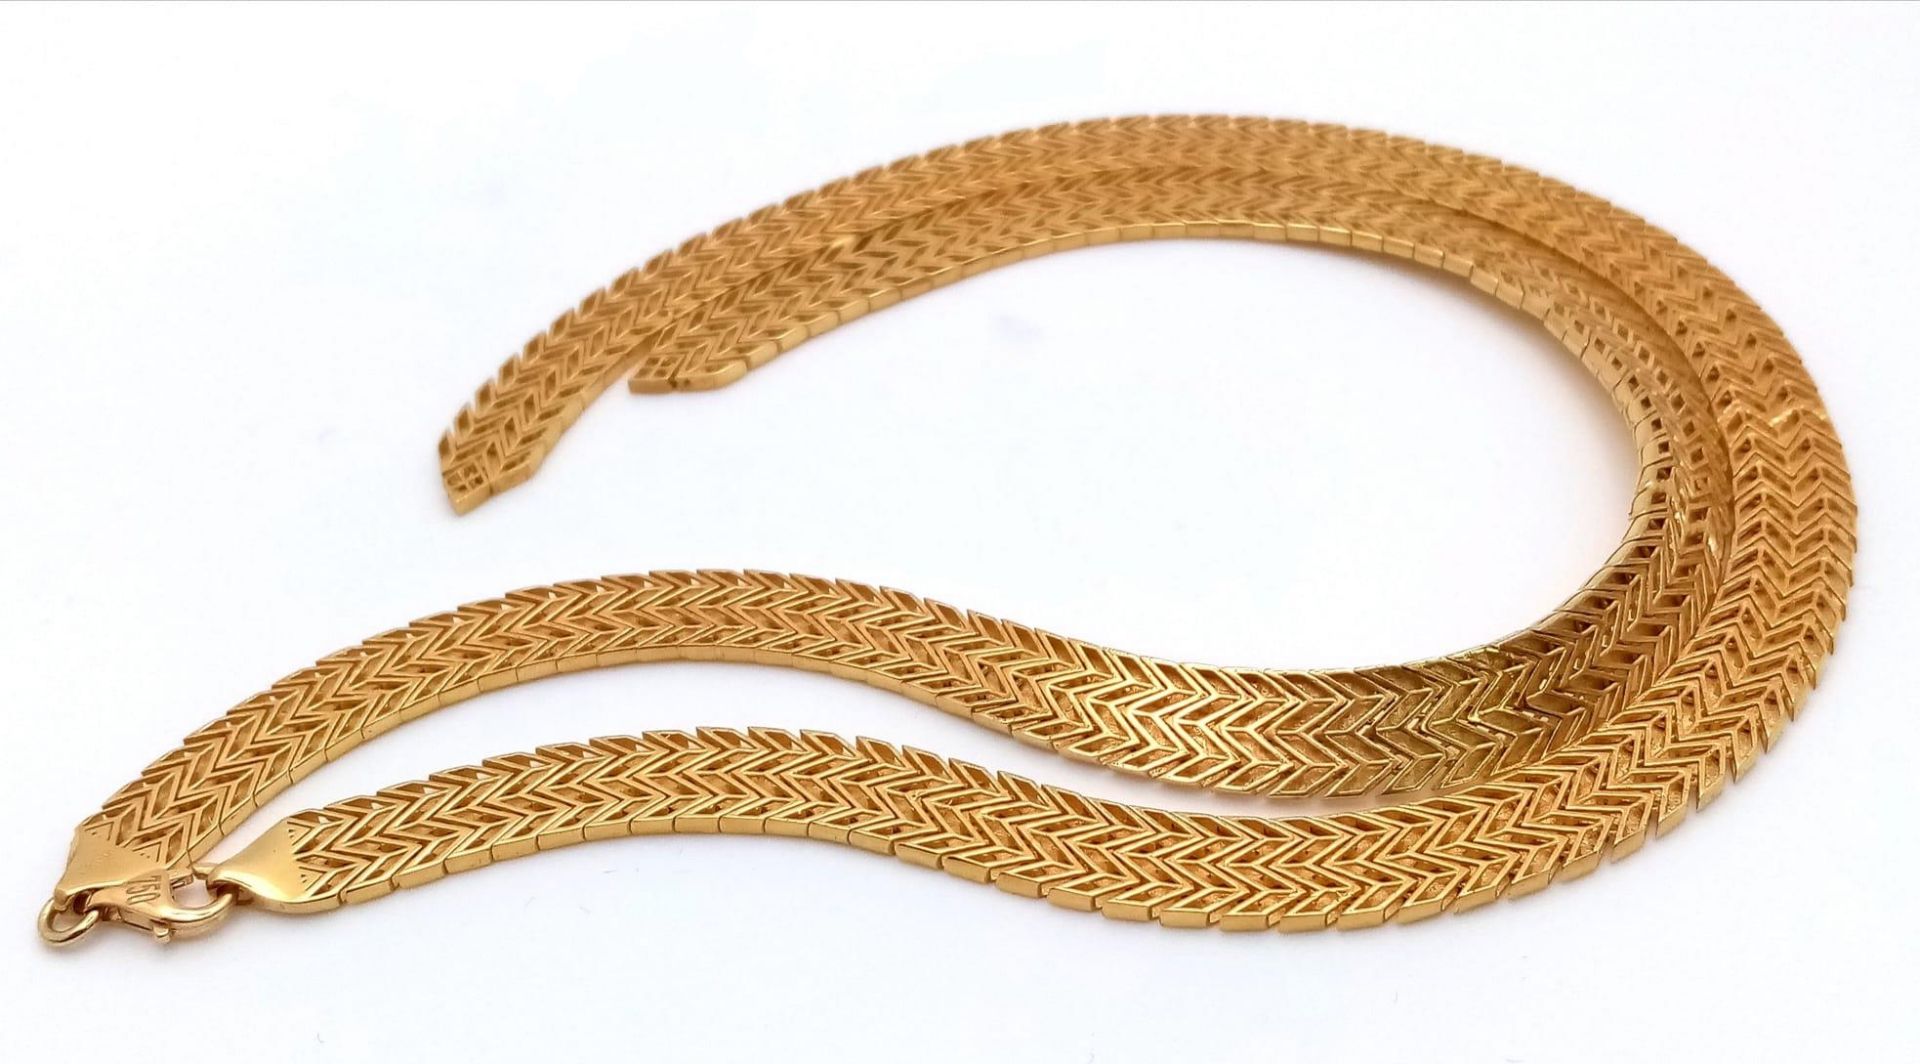 An Elegant 18K Gold Flat Scale Link Necklace with Twin Tassel Extenders. 48cm length. 35.25g weight. - Image 5 of 6